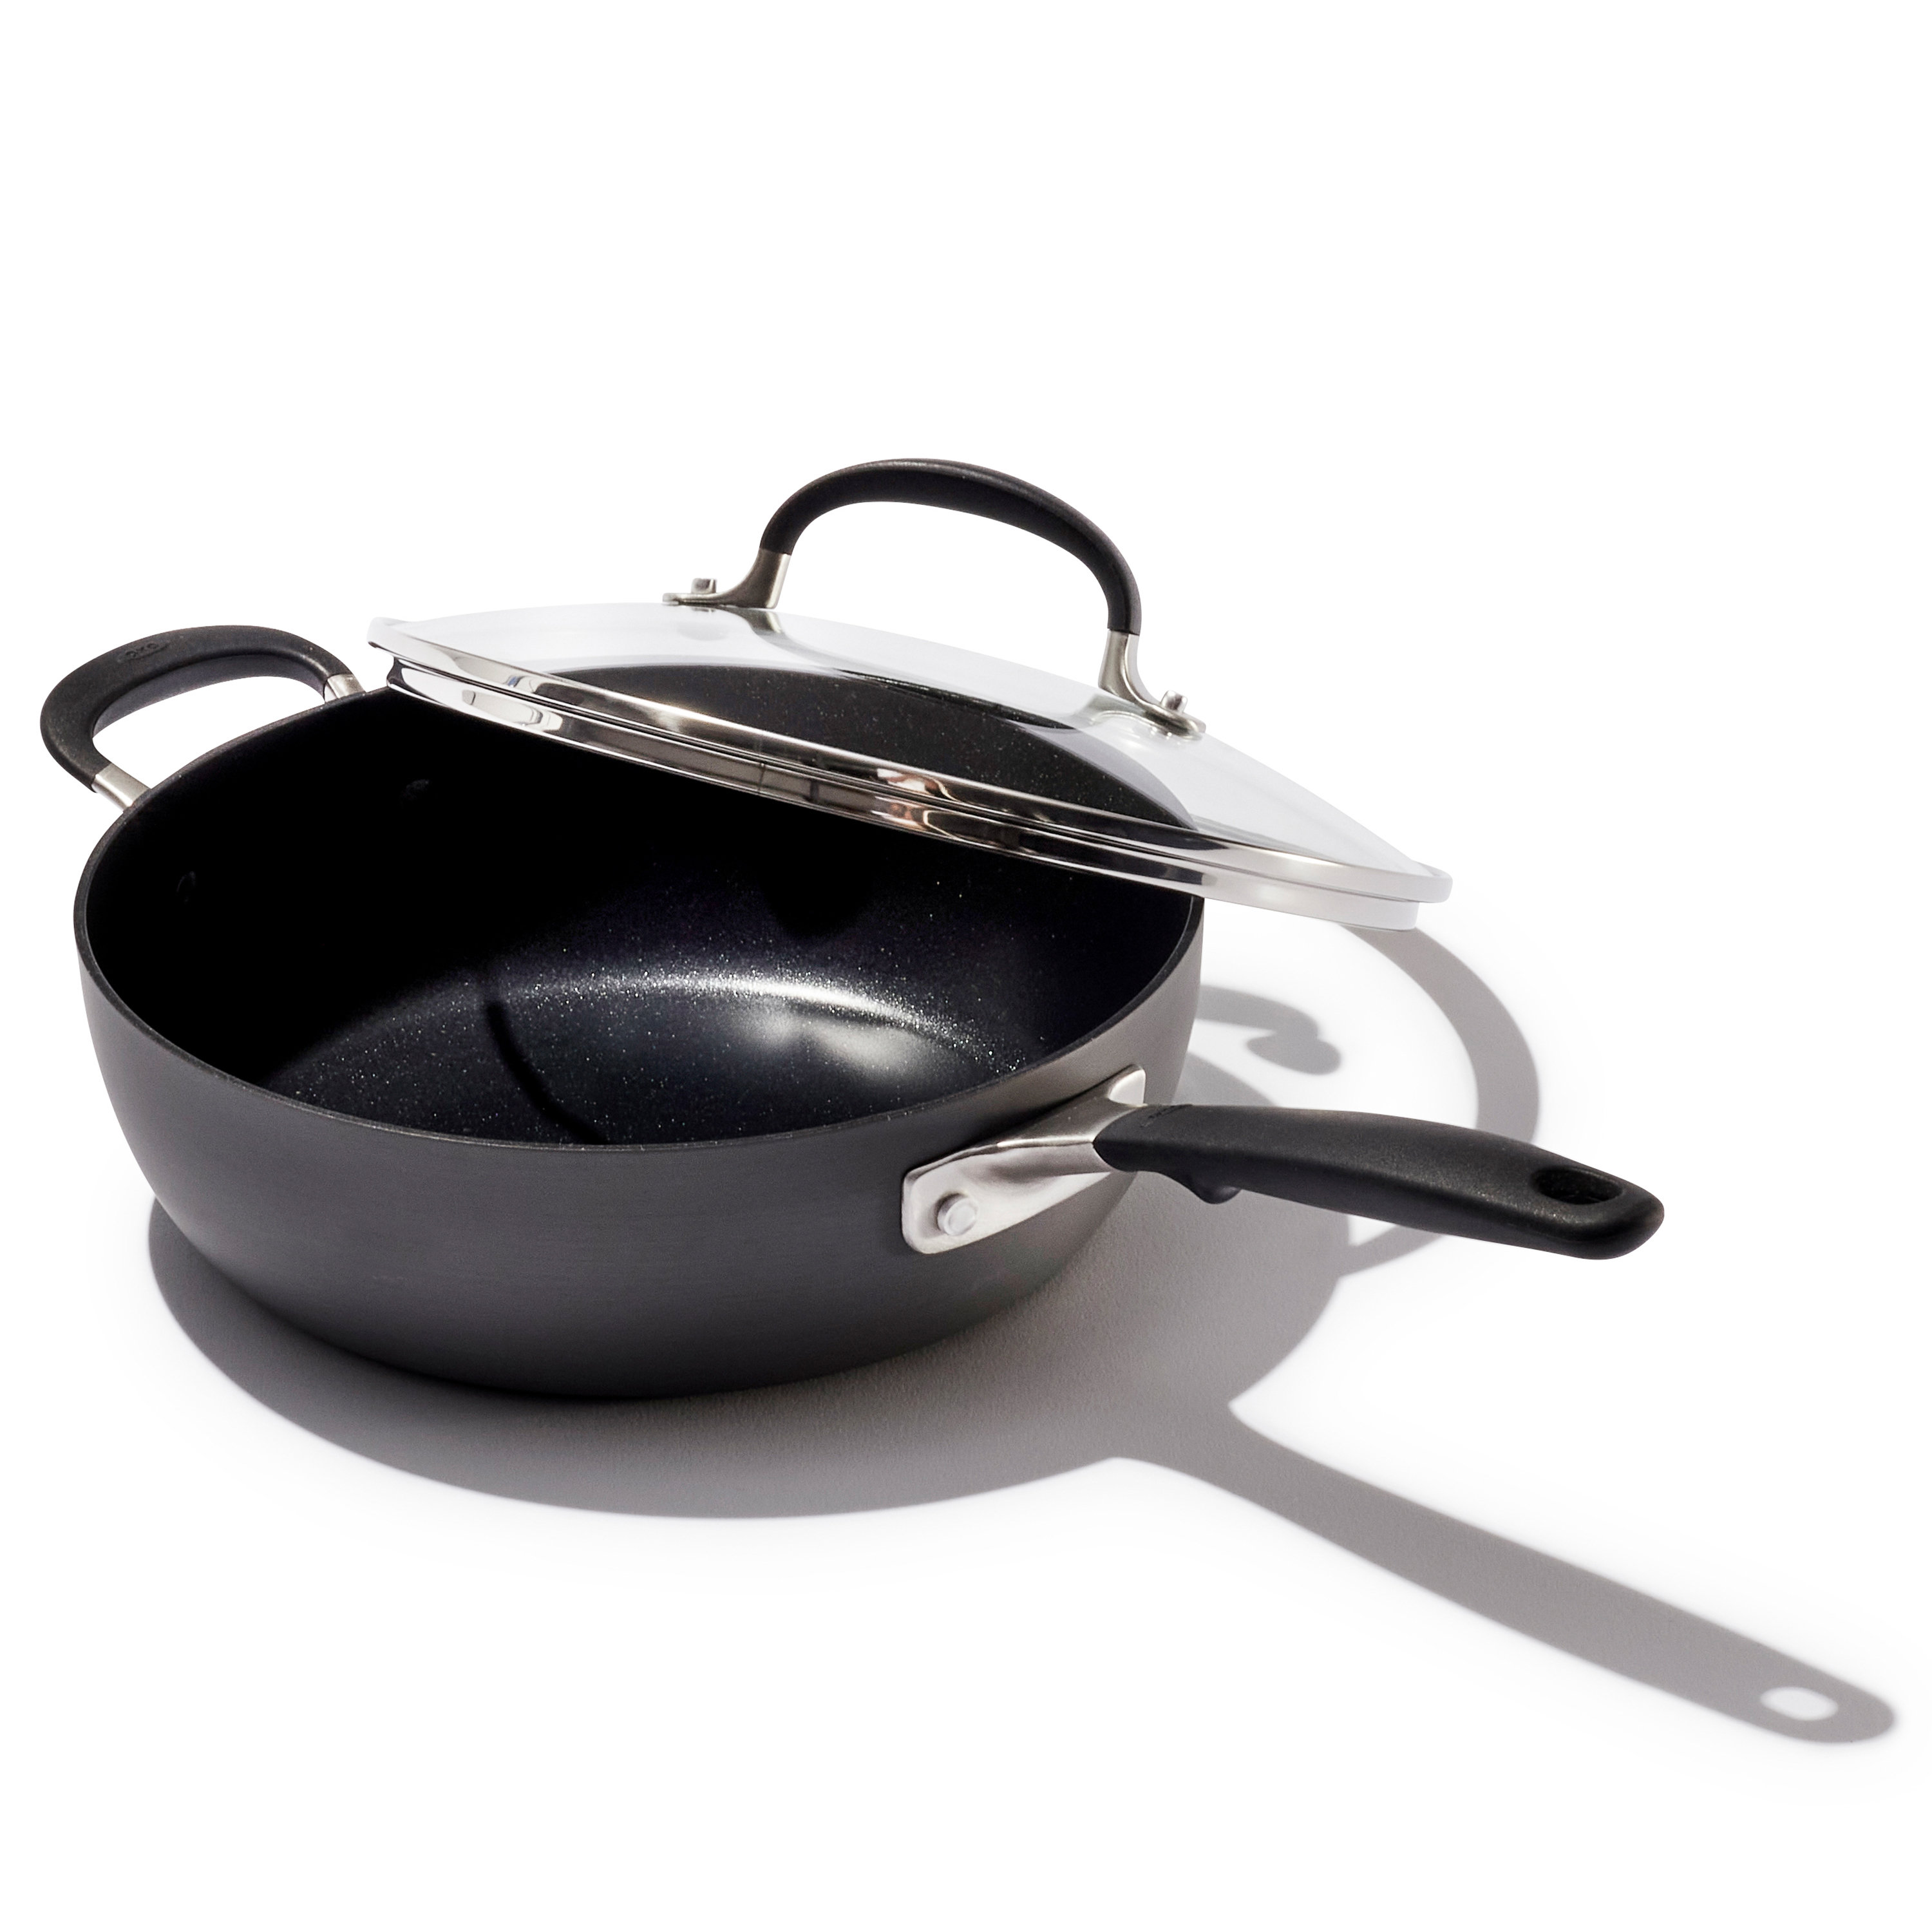 All-Clad all-clad ha1 nonstick hard anodized everyday pan with lid and  potholders, 12 inch, black